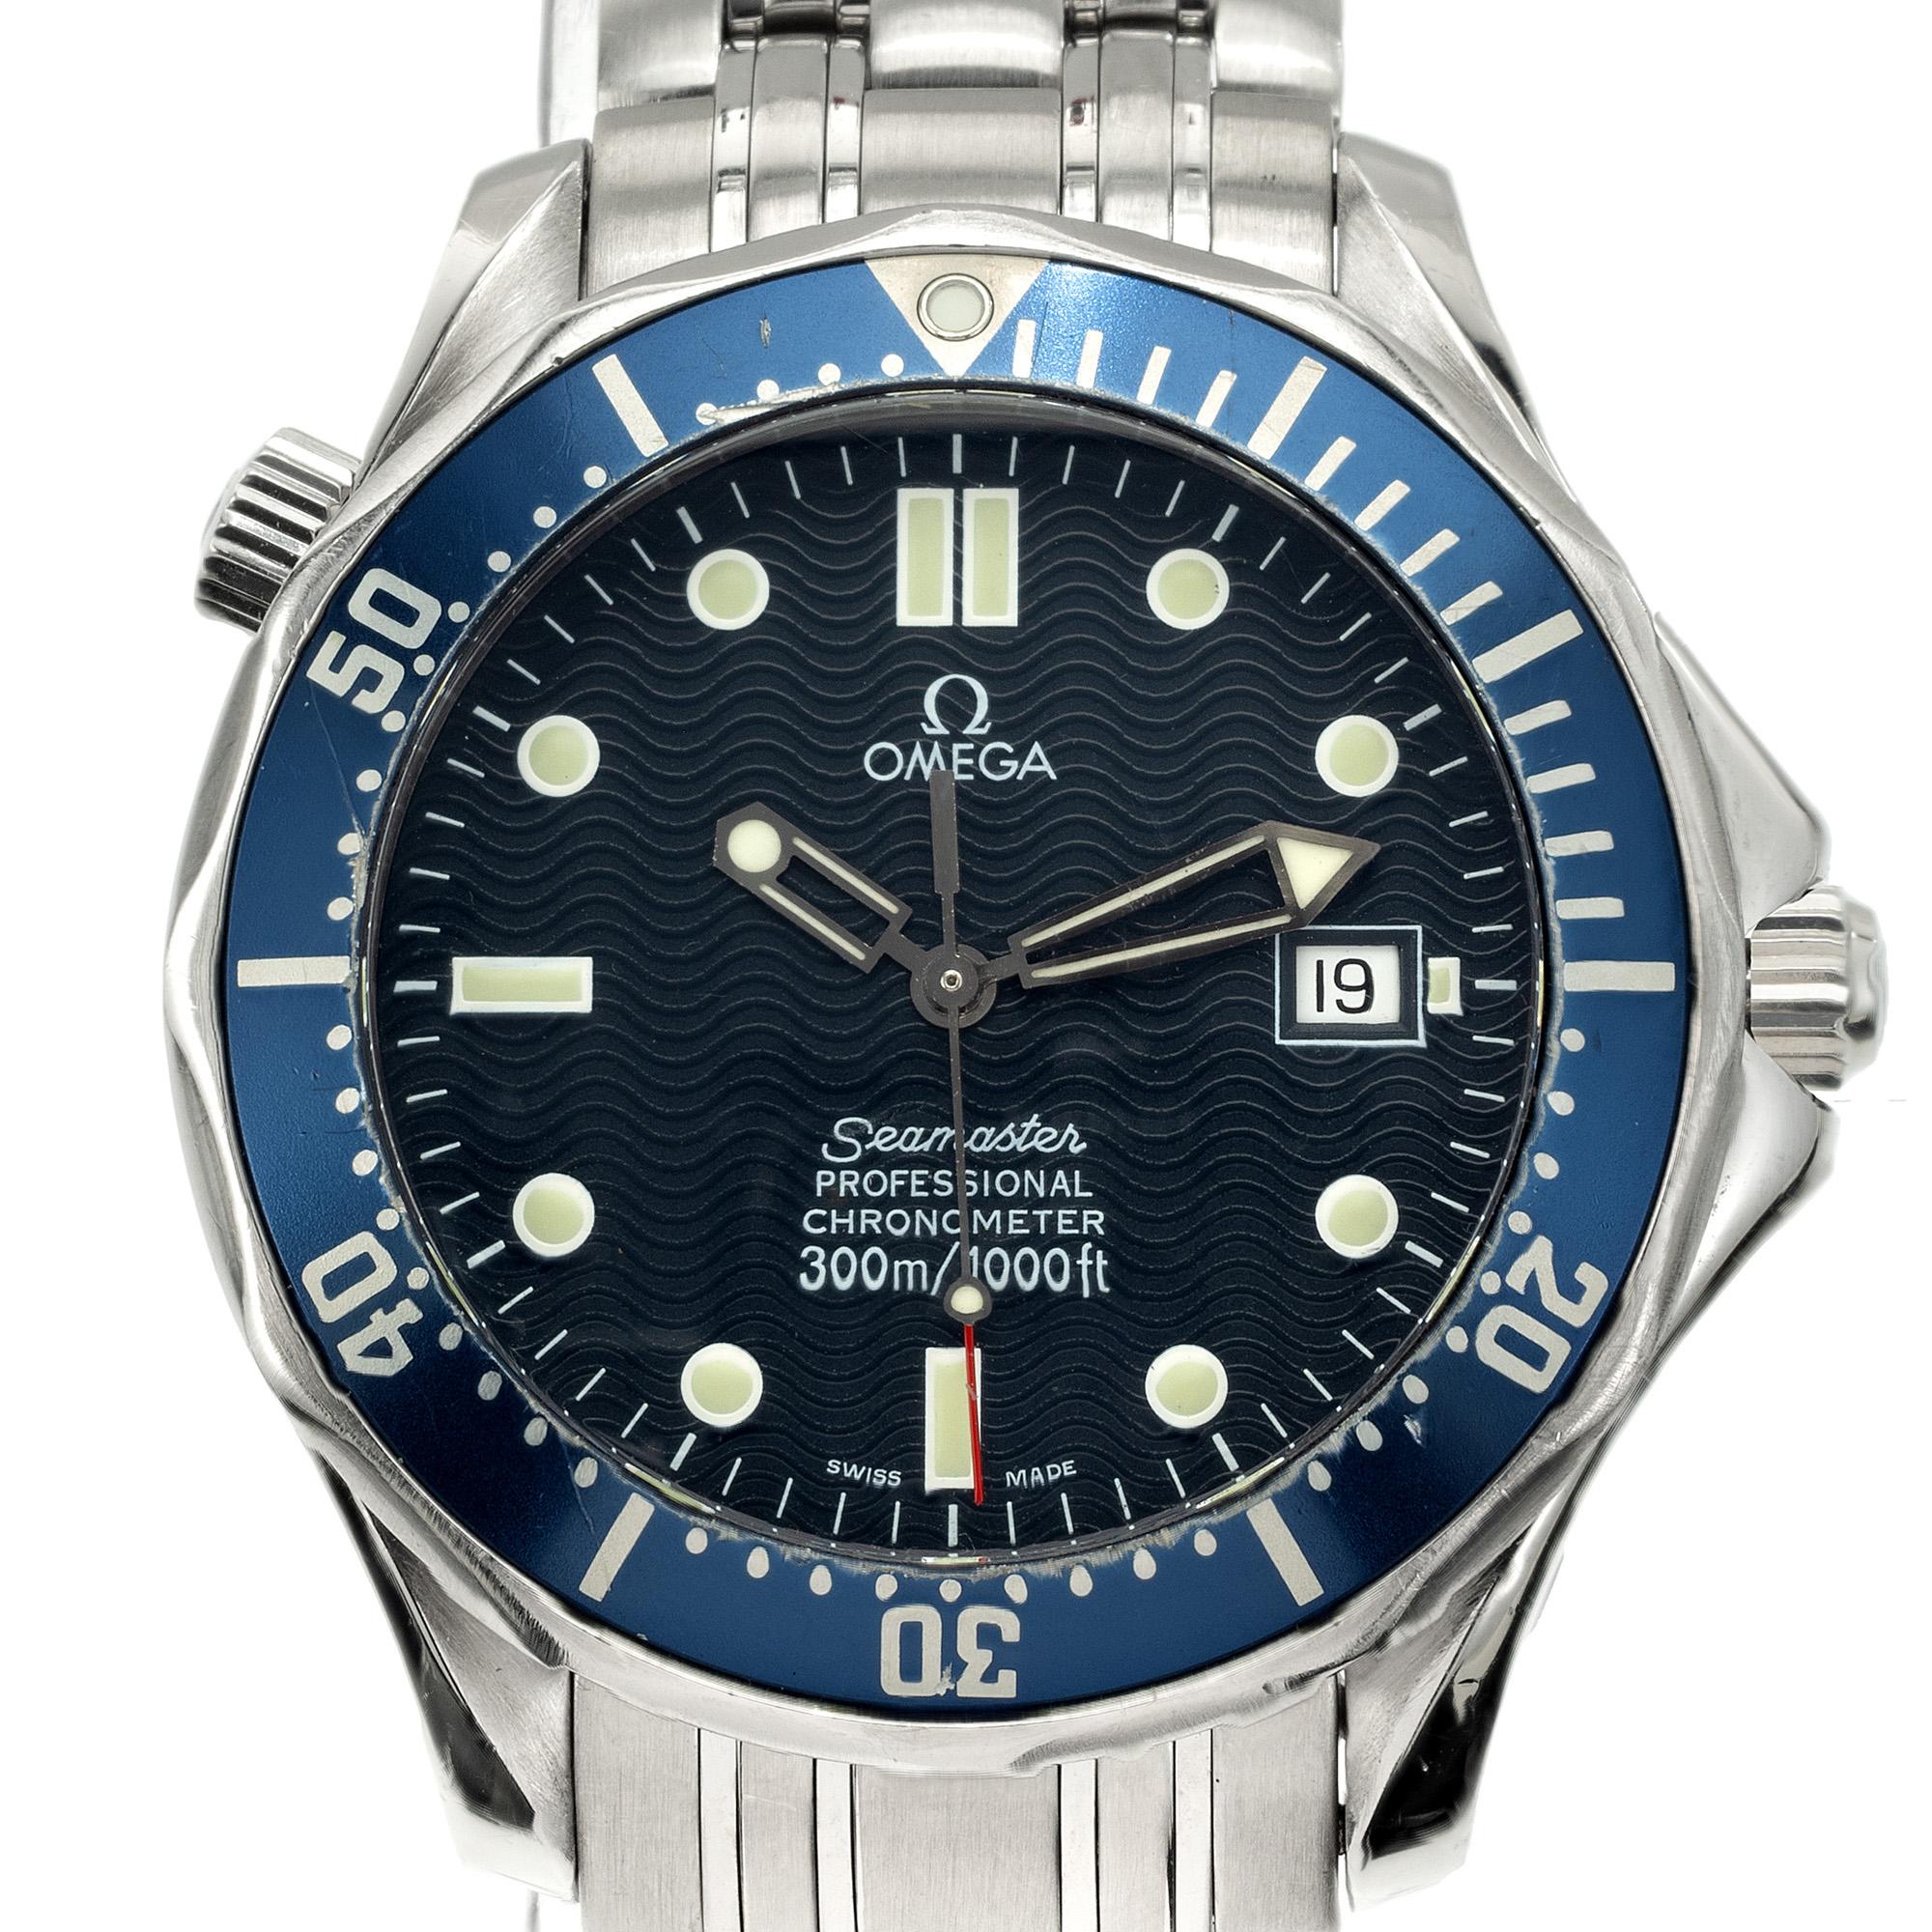 Omega Stainless Steel Professional Automatic Seamaster Wristwatch is a timeless masterpiece. This elegant timepiece seamlessly blends style with functionality. The stainless steel construction with a round dial and blue trim.

Length: 47.35mm
Width: